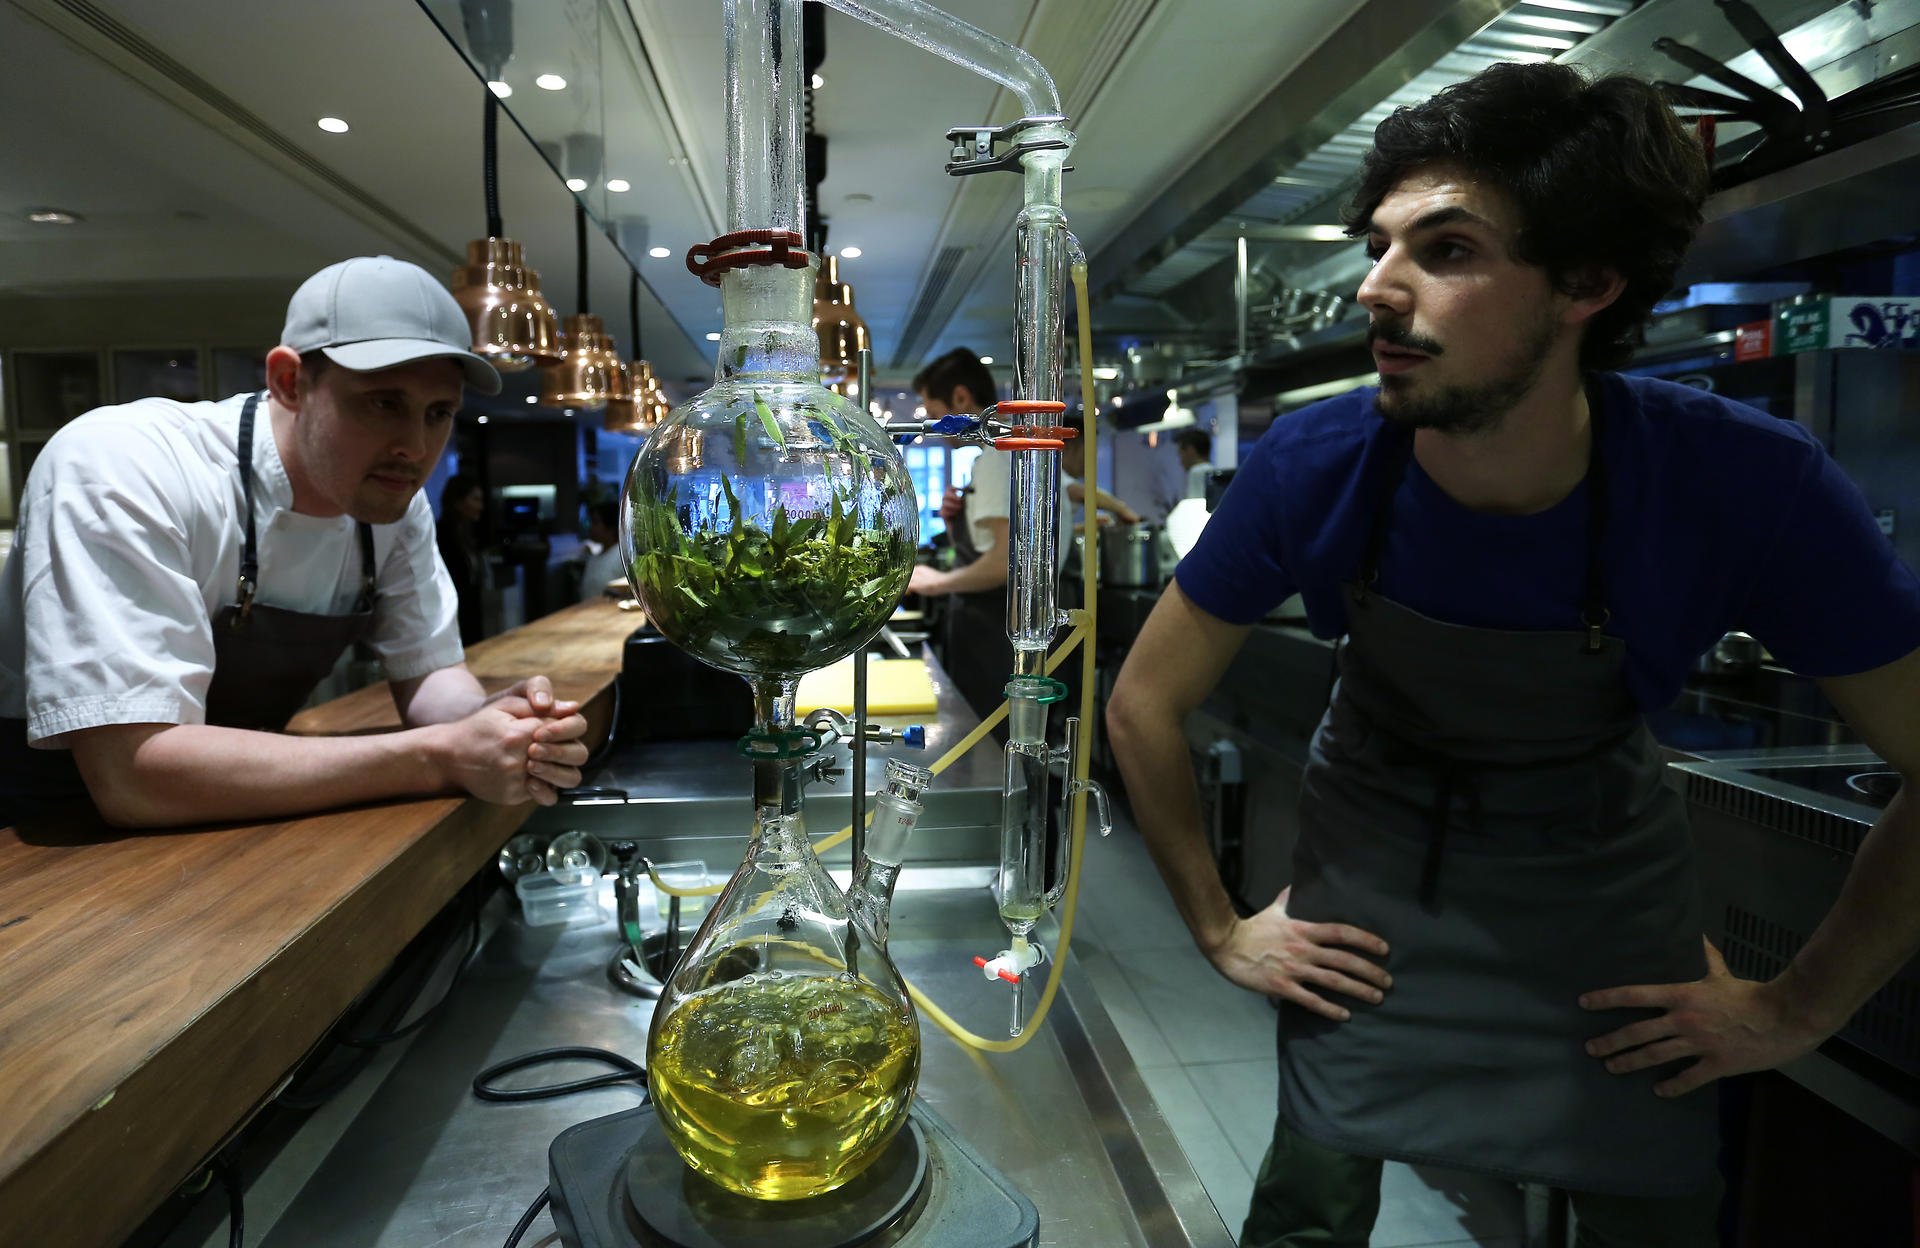 Founder and chef Nurdin Topham (left) and engineer in life sciences and technology Martin Vogel work on their steam distillation equipment for essential oils at NUR restaurant in Central. Photo: Jonathan Wong